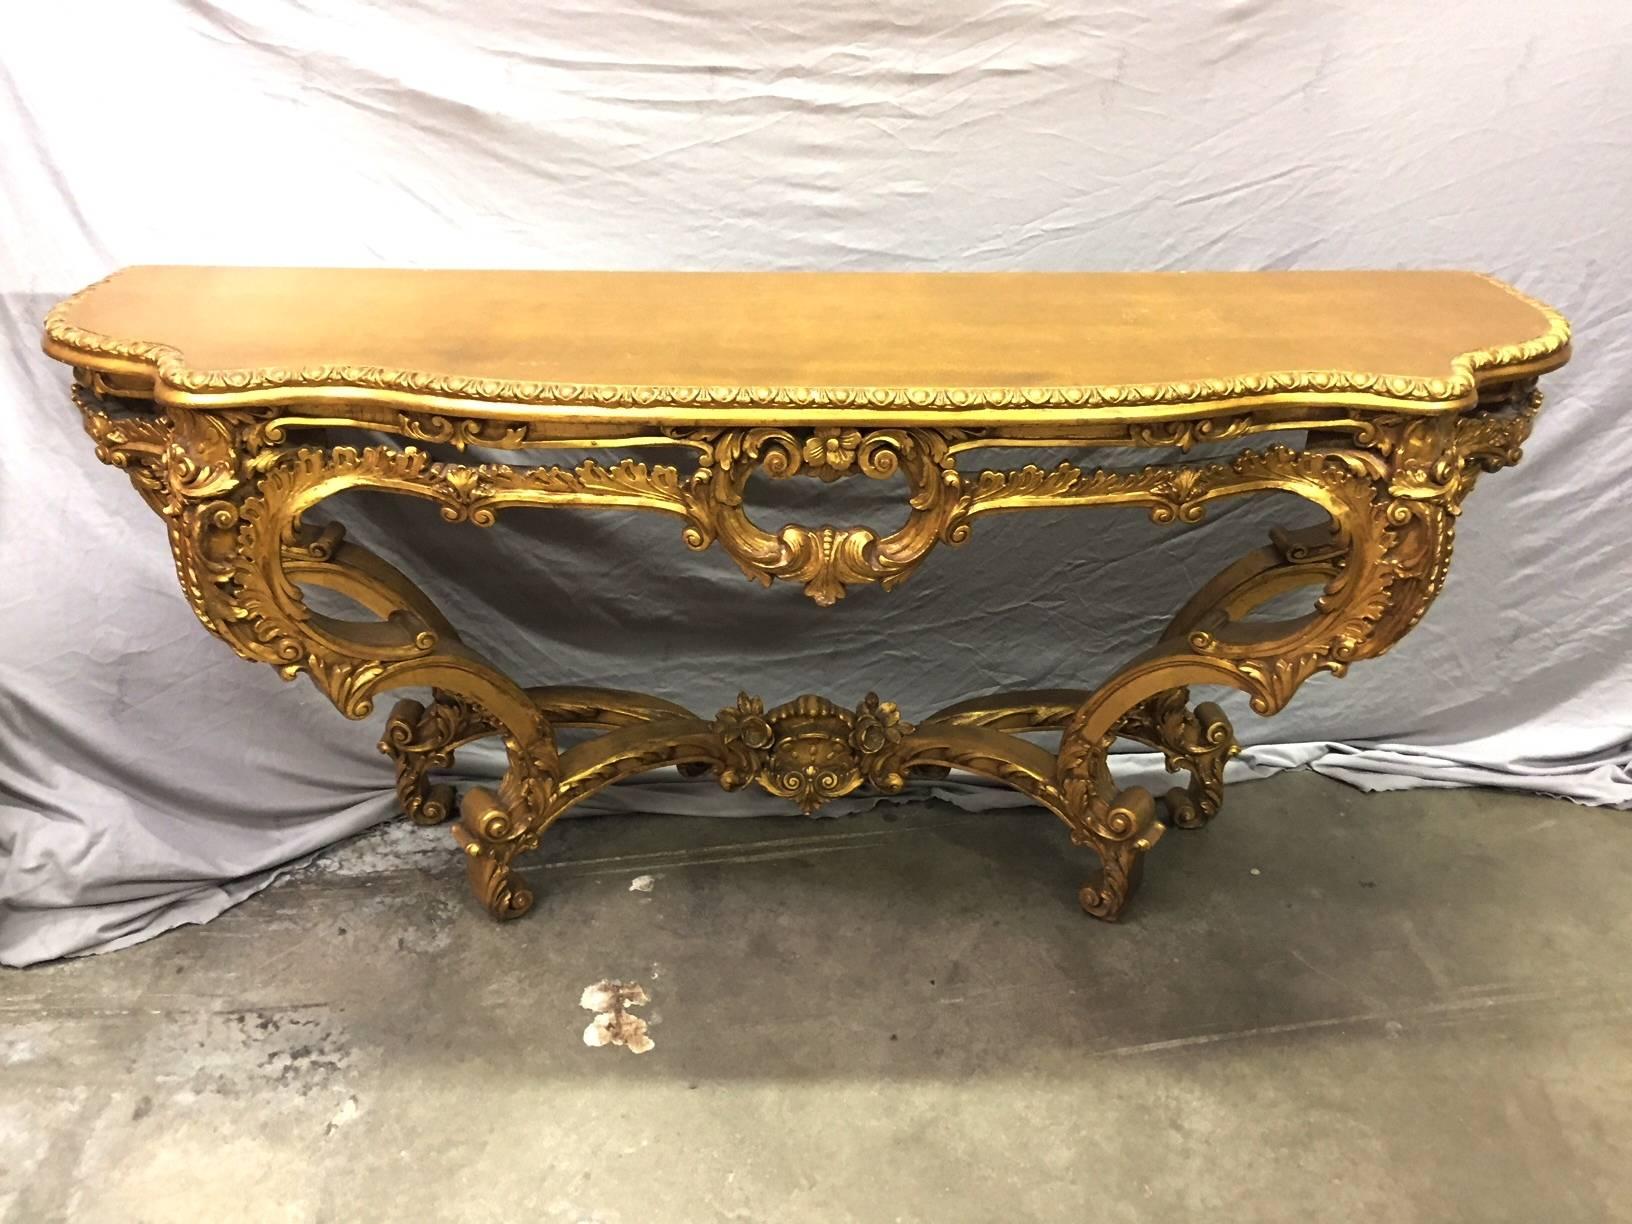 Beautiful Italian Rococo style carved giltwood console has a wooden serpentine top over an acanthus-tip border and a pierced rocaille and flower head apron with scrolling acanthus and C-scrolls on cabriole legs conjoined by an floral and scrolling